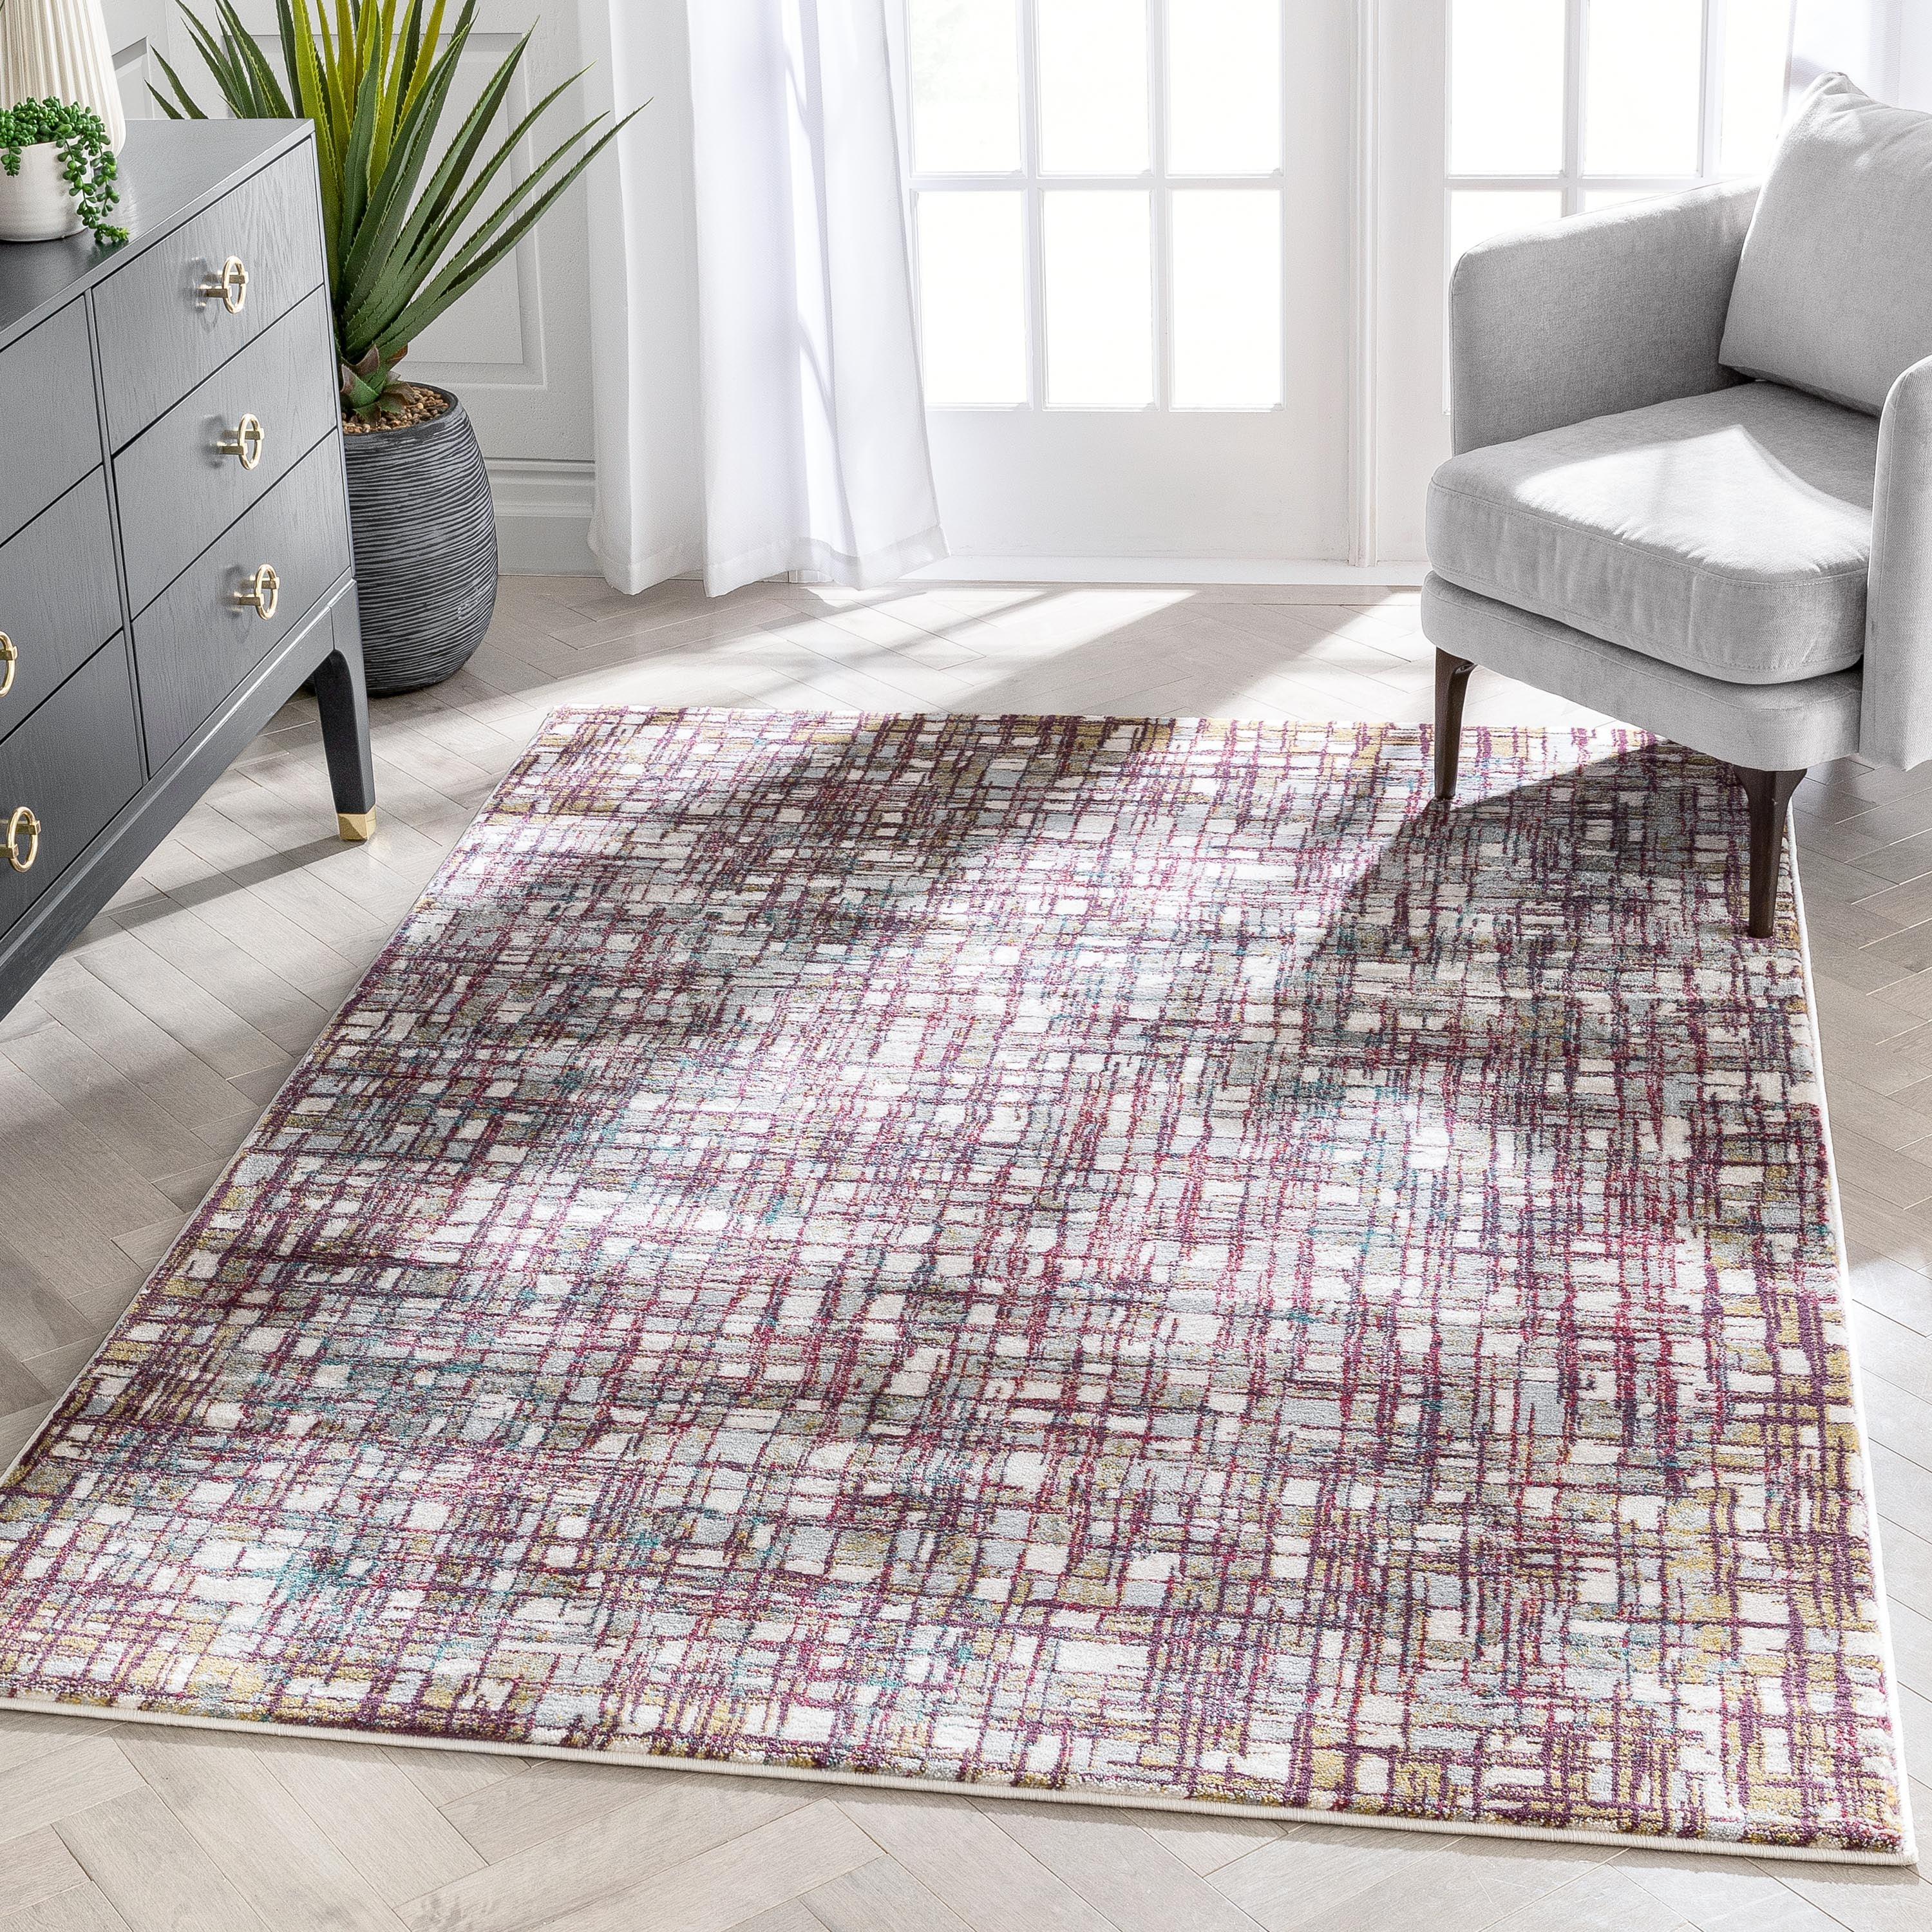 Well Woven Basket Weave Multi Color, Grey And Lavender Area Rugs